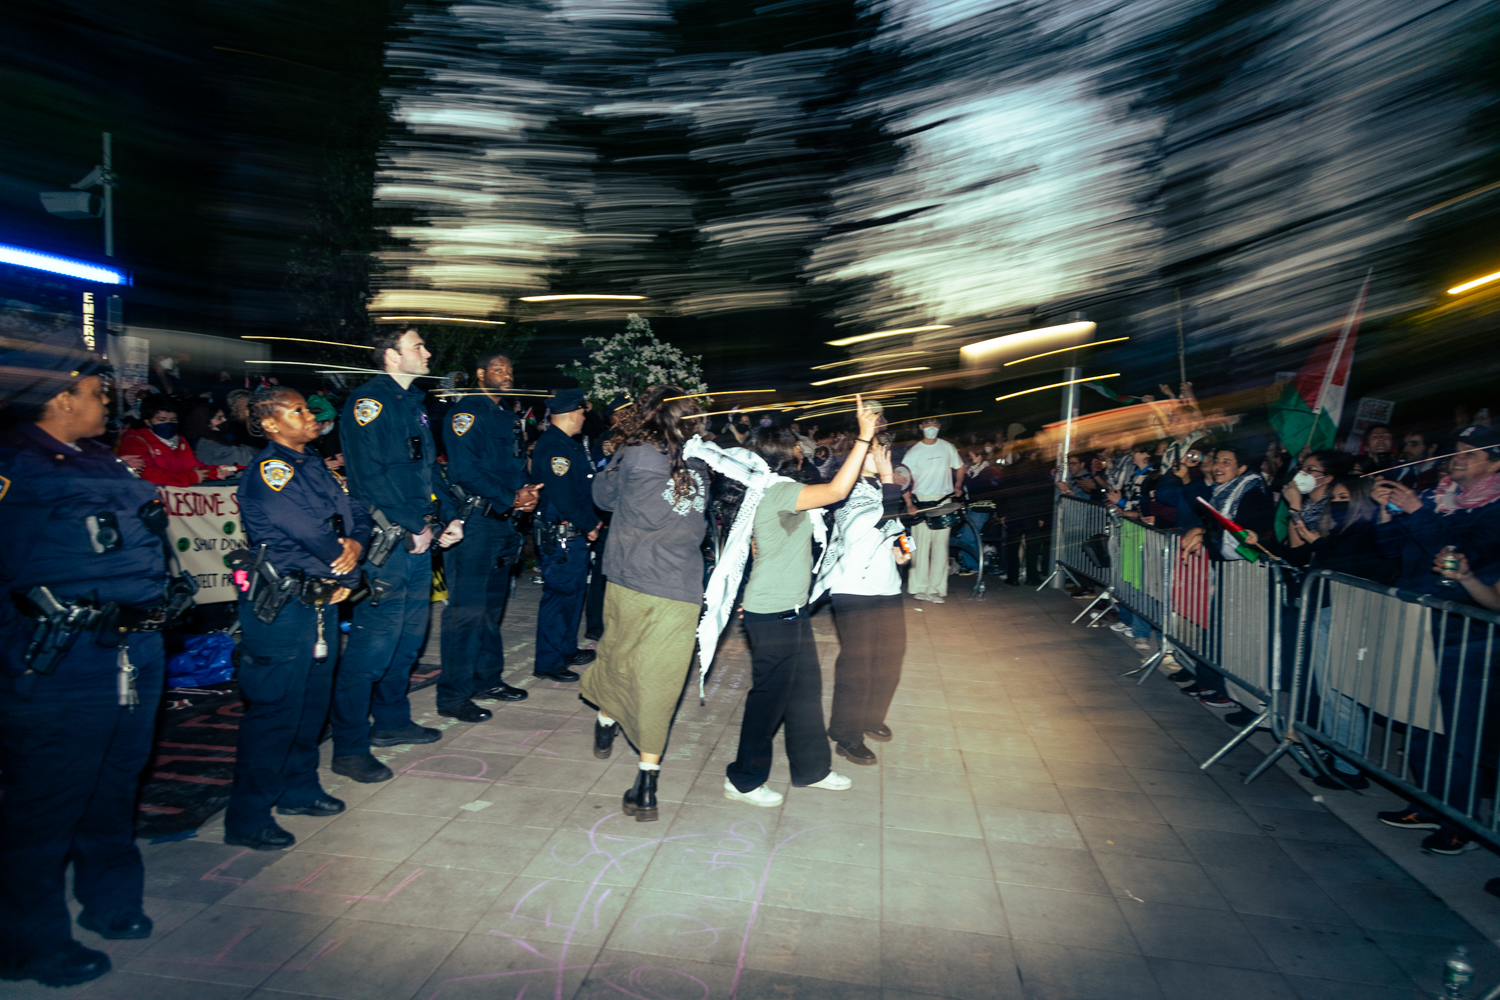 Protesters within the encampment lead chants and dances in front of a line of N.Y.P.D. officers.